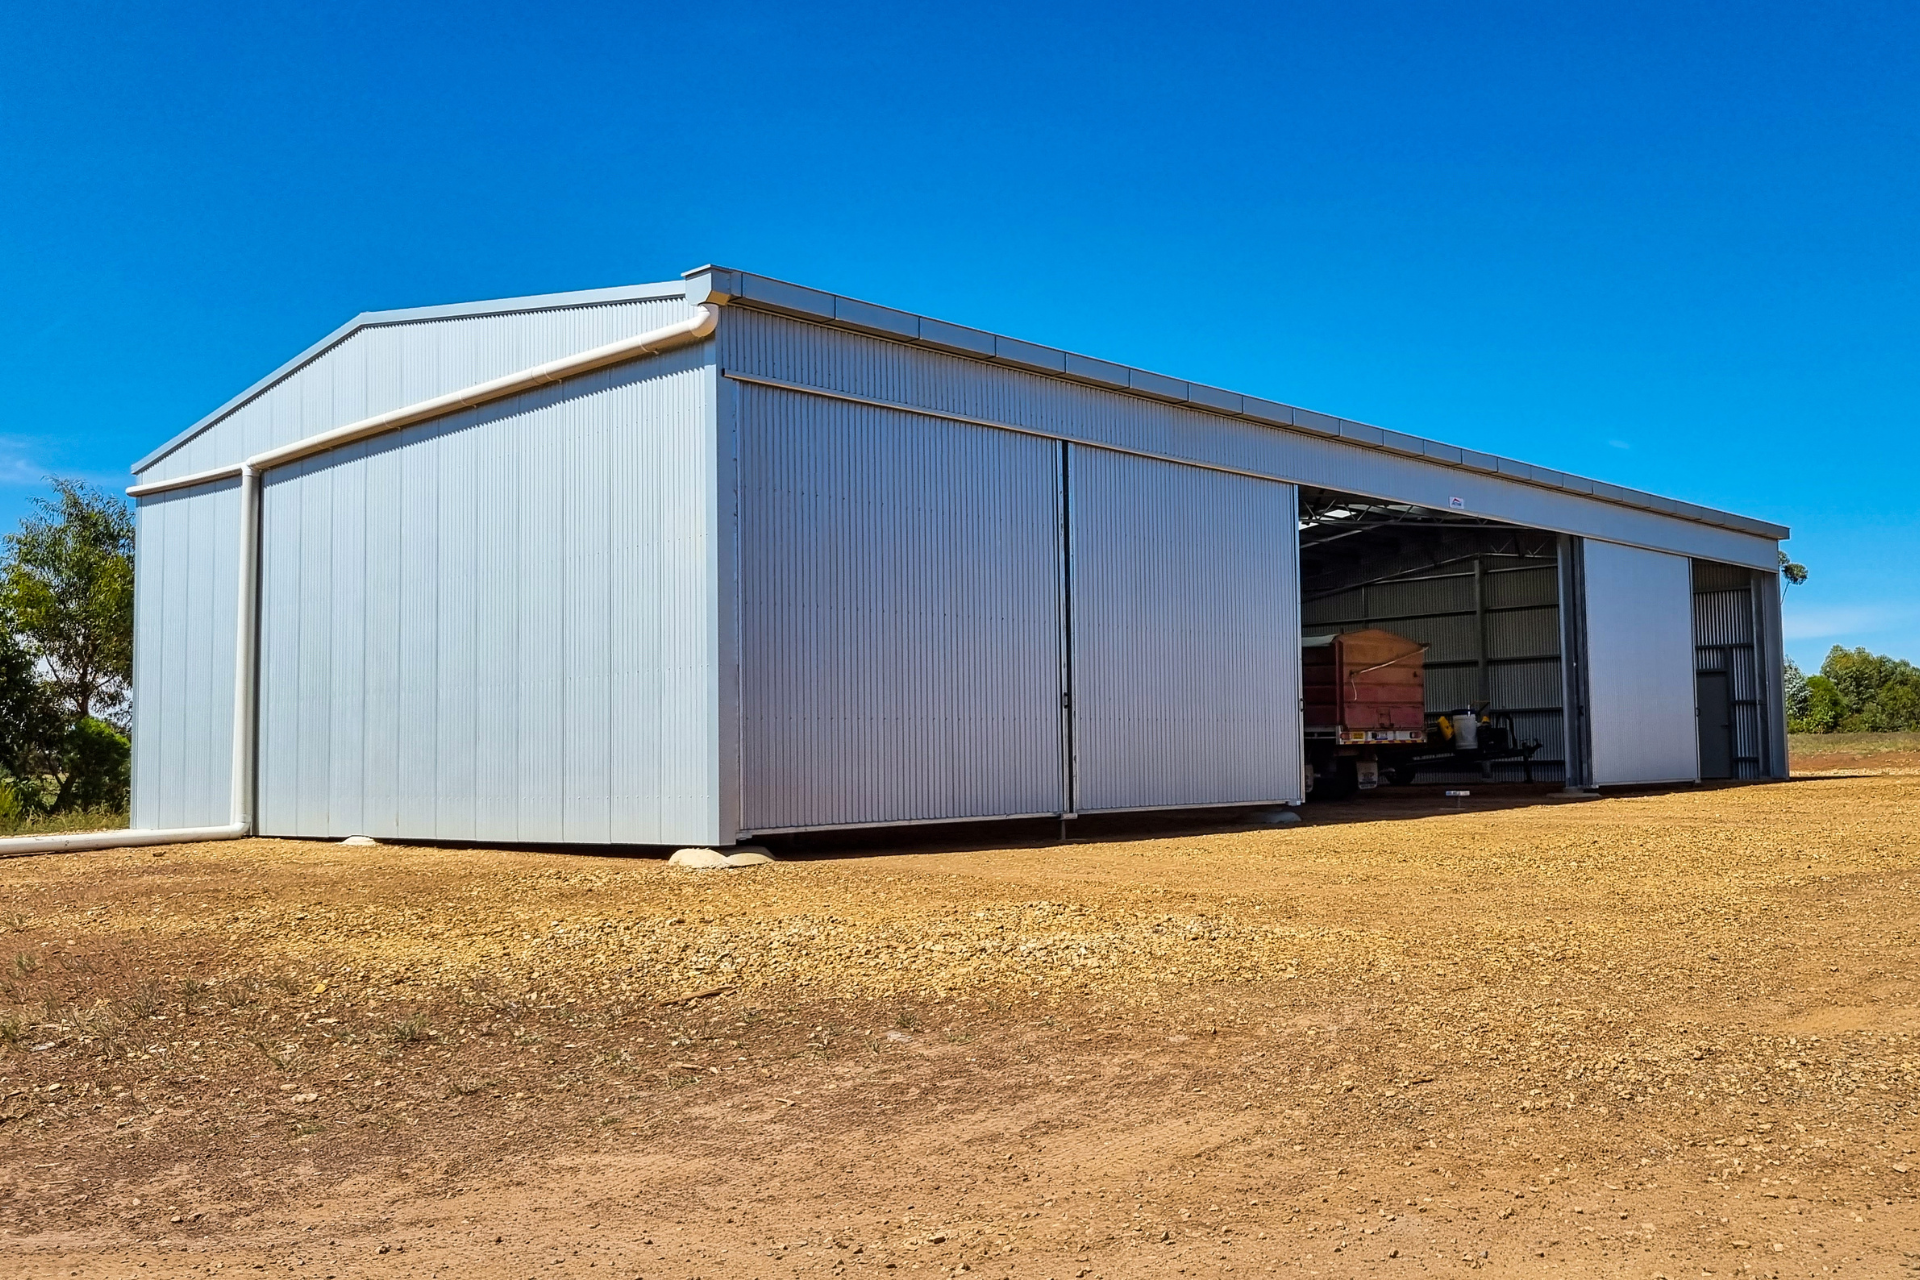 A 24m x 12m x 4.5m machinery shed at Woorndoo VIC